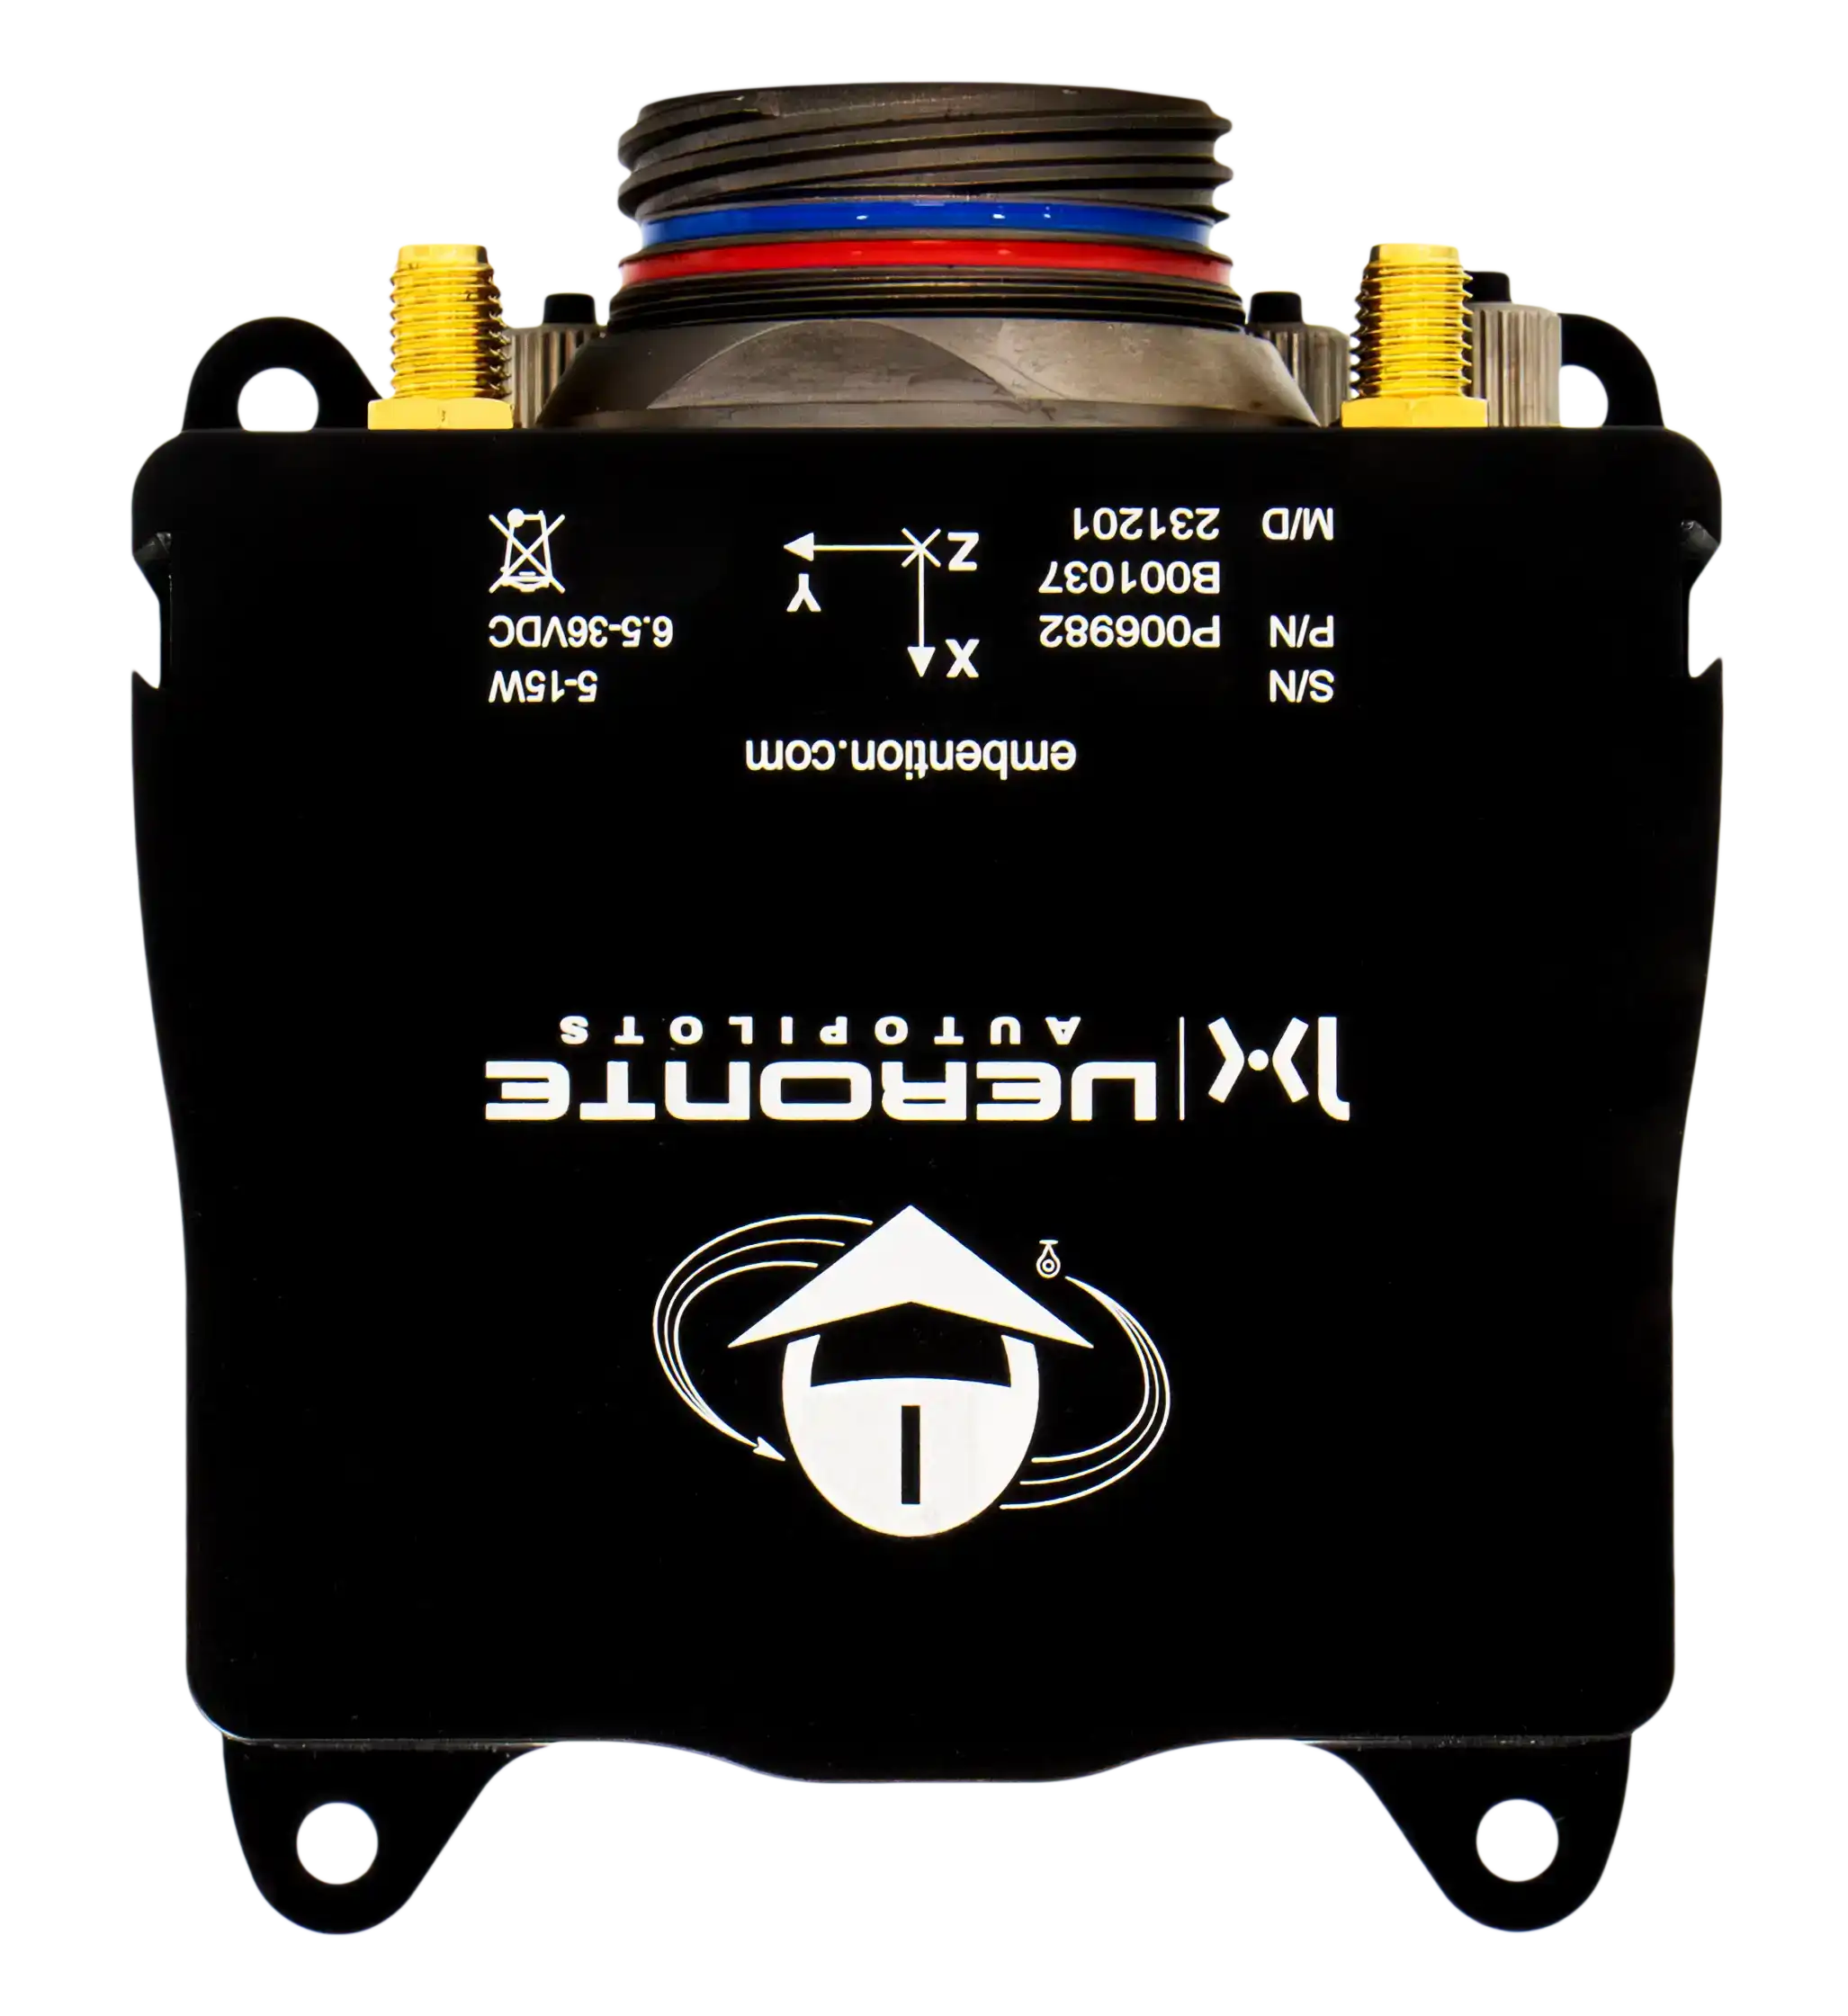 Reverse view of a black electronic module labeled 'Veronte Autopilots' upside down, featuring prominent golden connectors and colorful cable harnesses, set against a dark backdrop